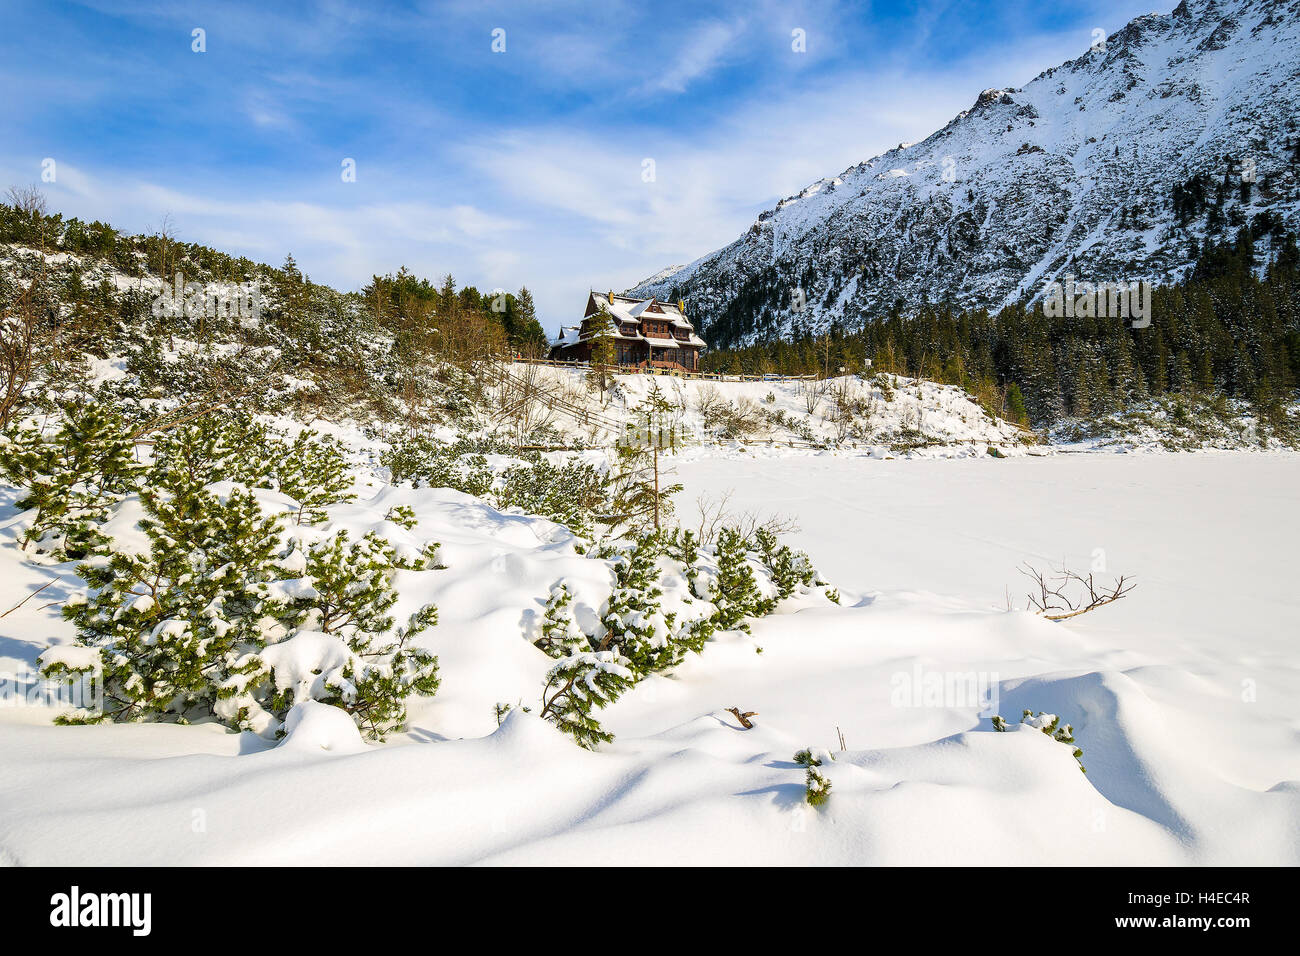 Frozen Morskie Oko lake covered with fresh snow and mountain refuge in distance, Tatra Mountains, Poland Stock Photo